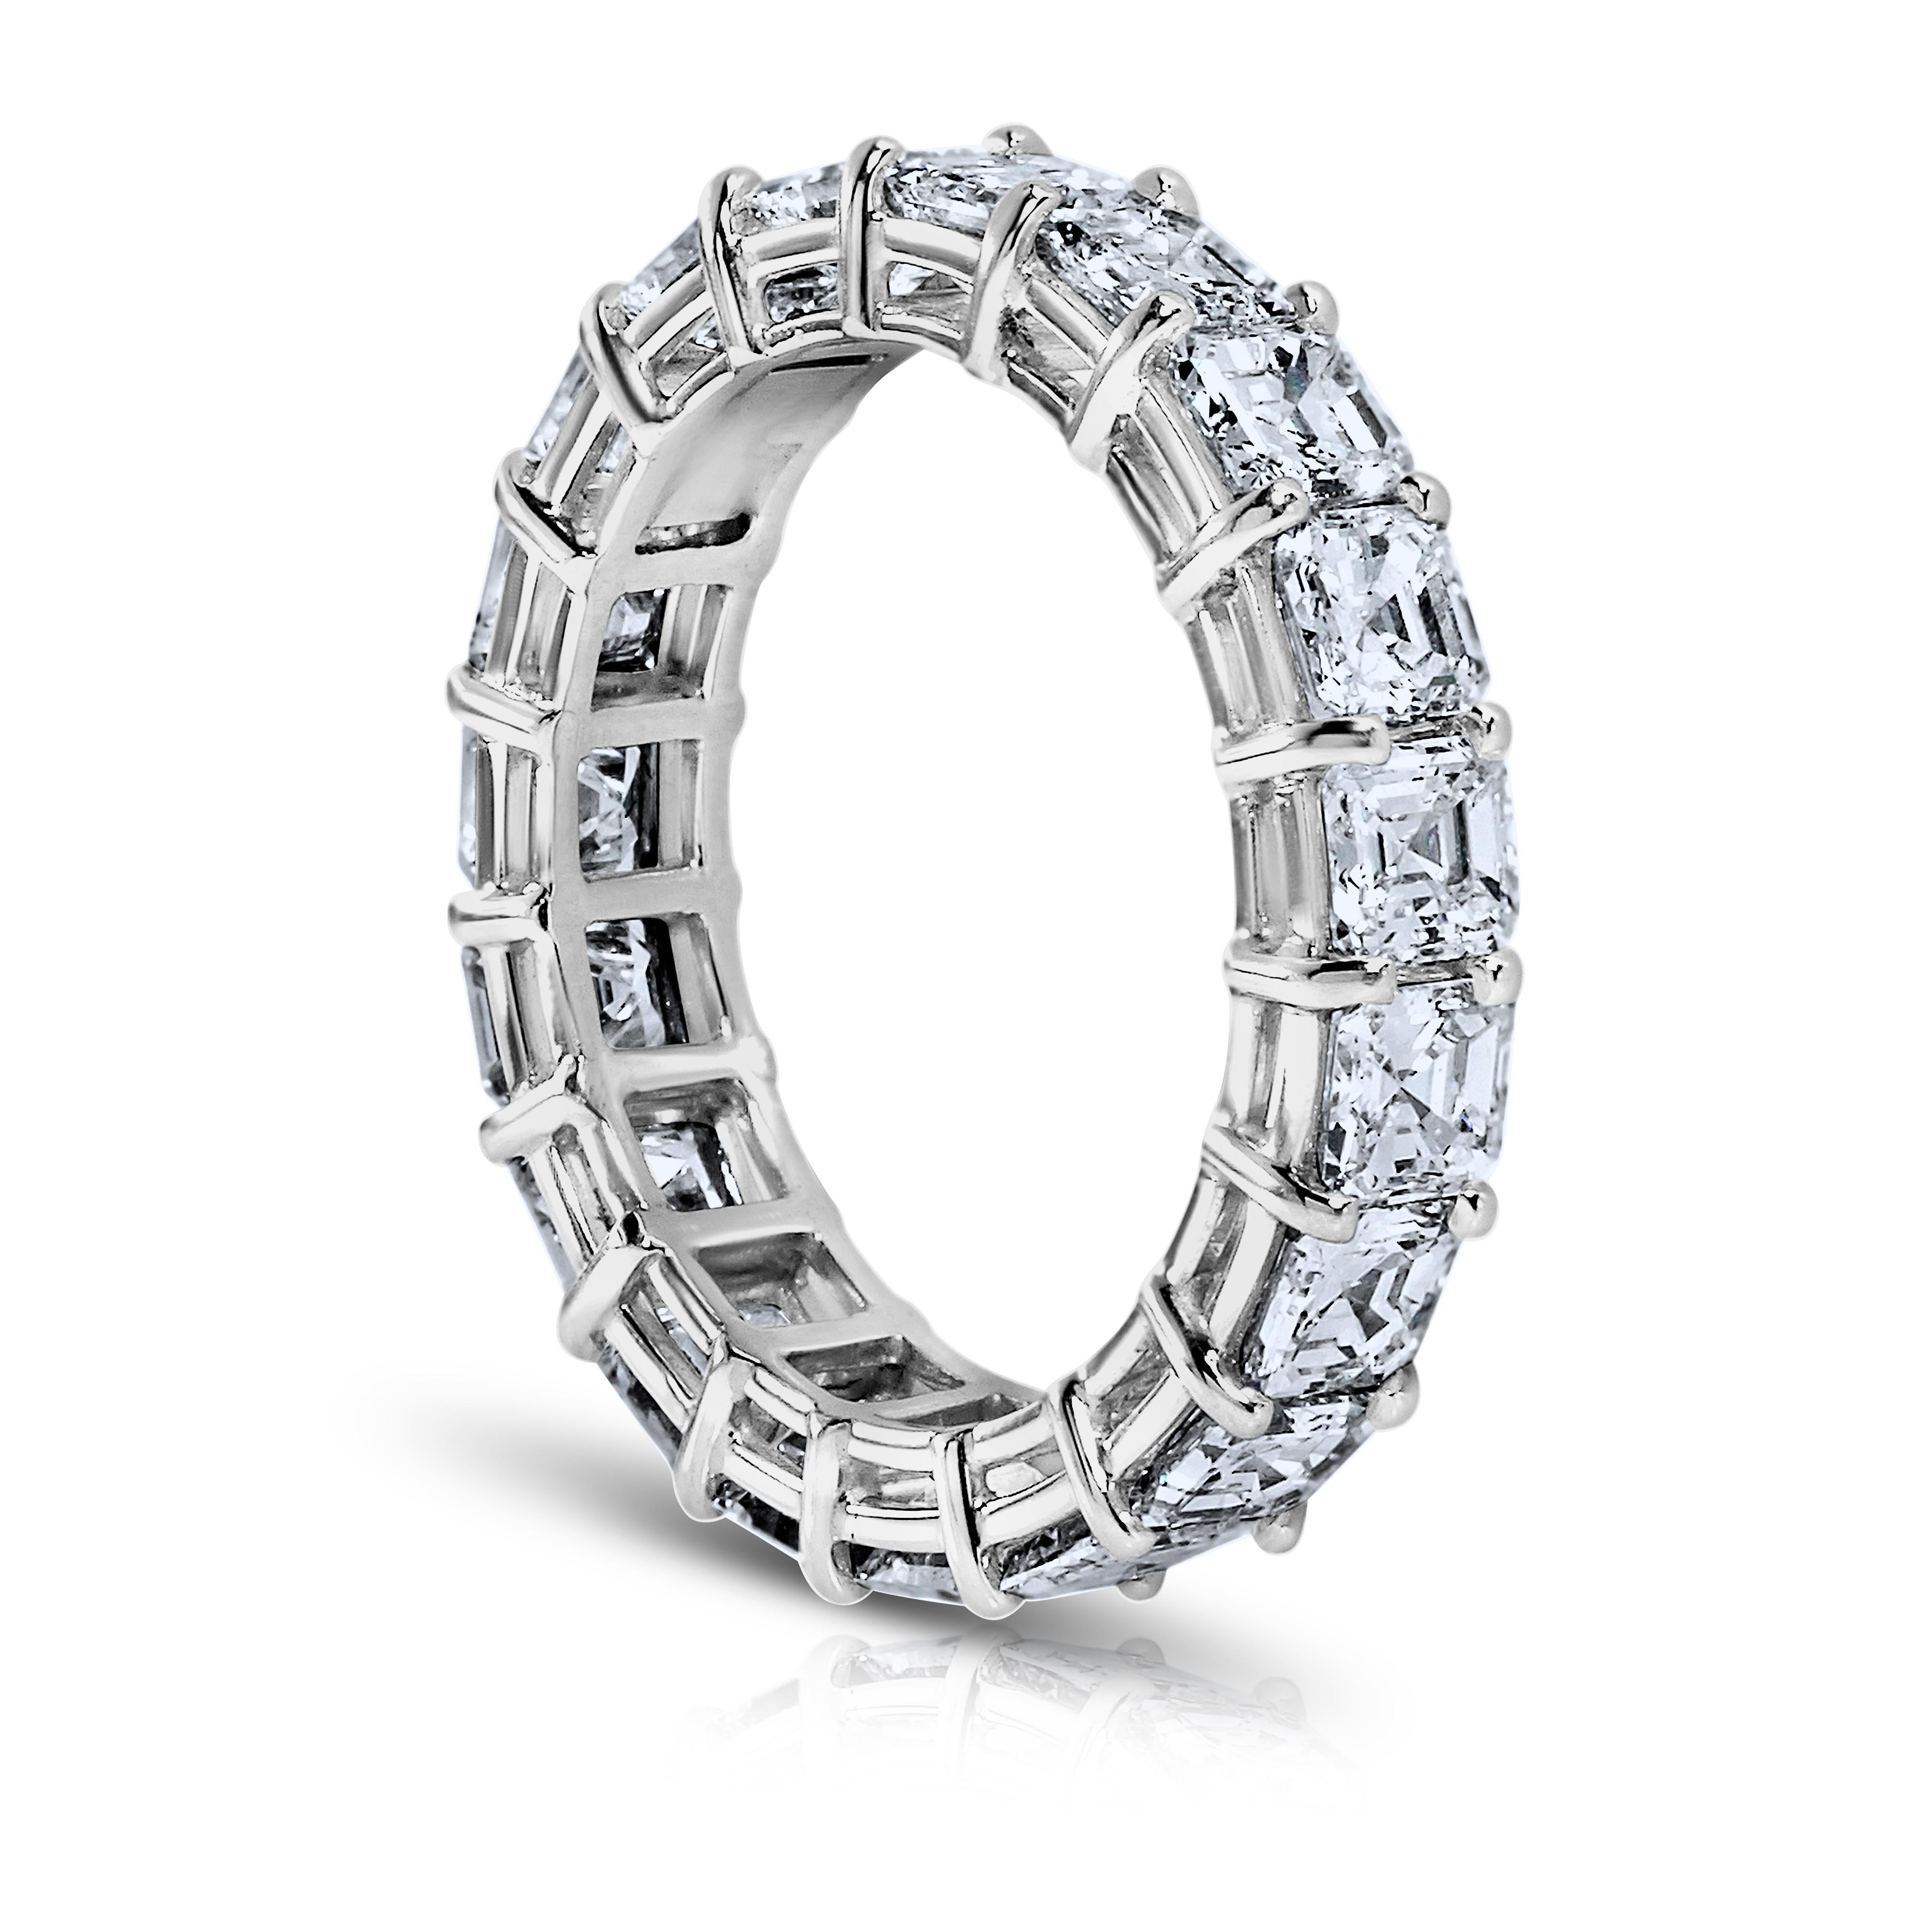 

Asher Cut diamond ring platinum eternity band shared prong style with a gallery.
20 perfectly matched diamonds weighing a minimum of 4.00 cts. G.I.A certificates for each diamond . Ranging from D-F in color . VVS1-VS2 in clarity .
Lab tested